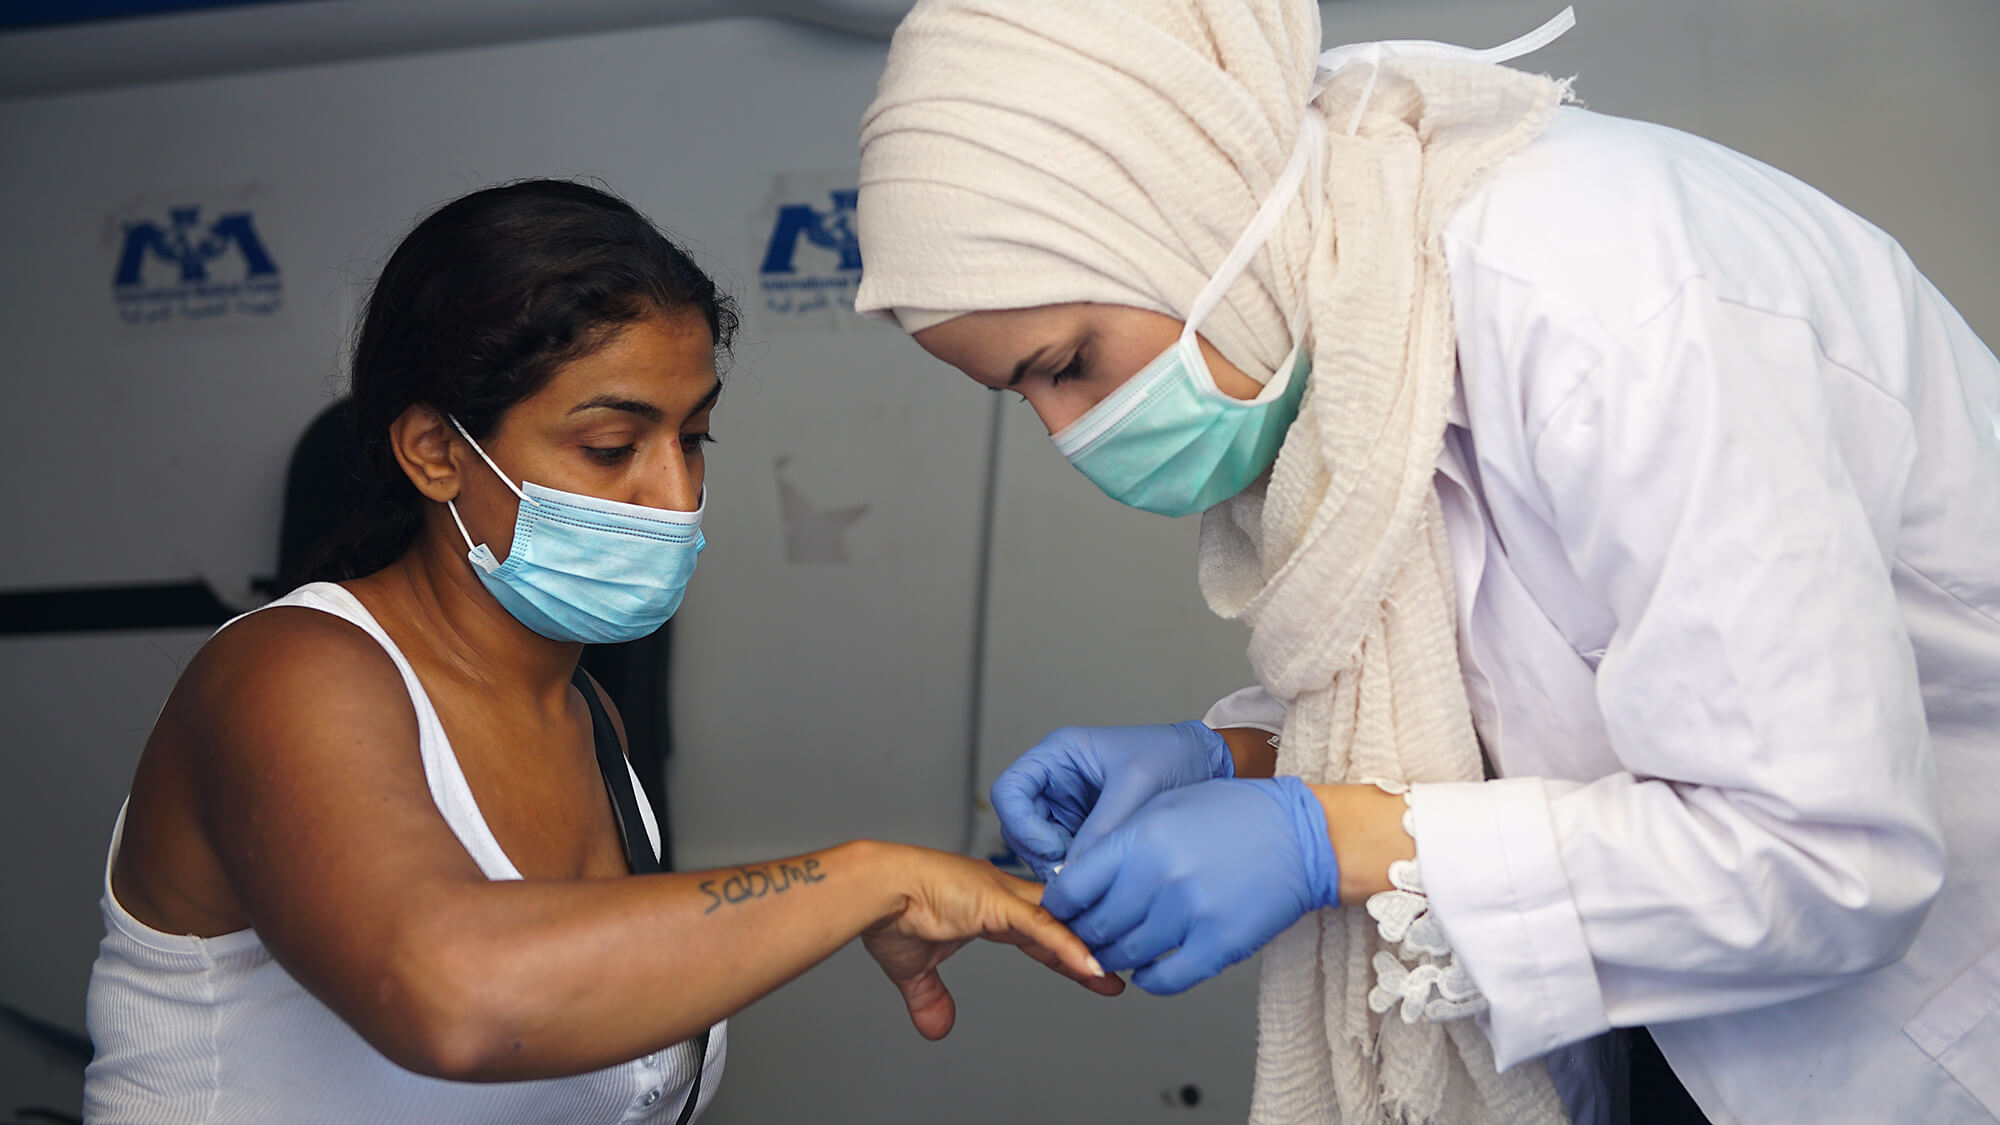 International Medical Corps continues to provide health services in Lebanon.